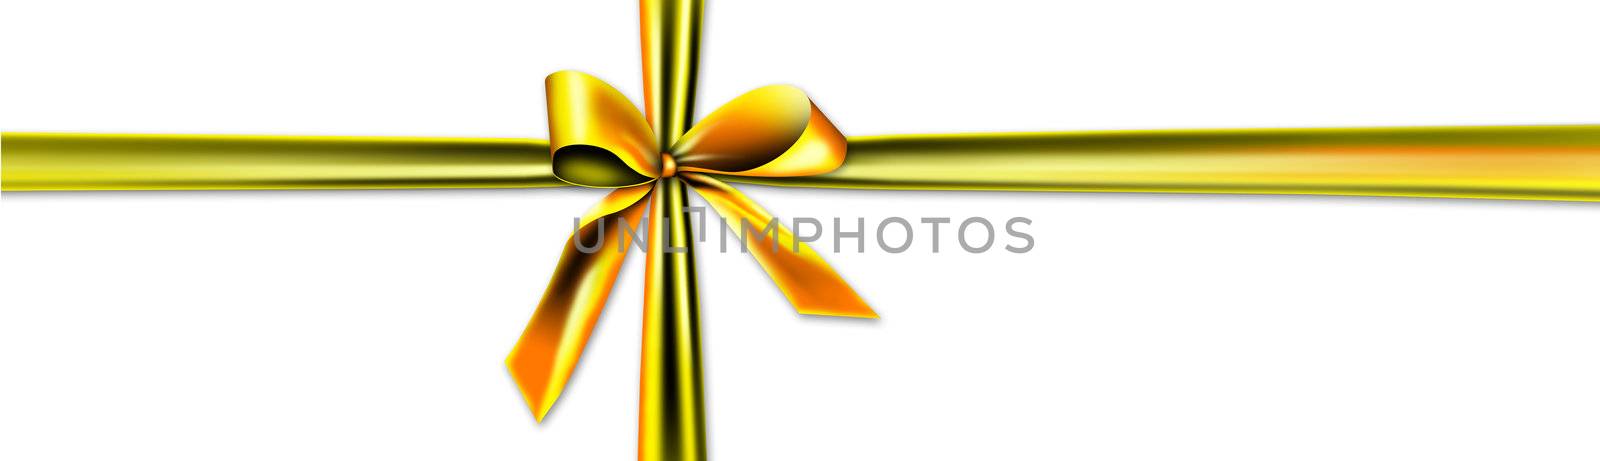 gift ribbon for a huge gift by photochecker